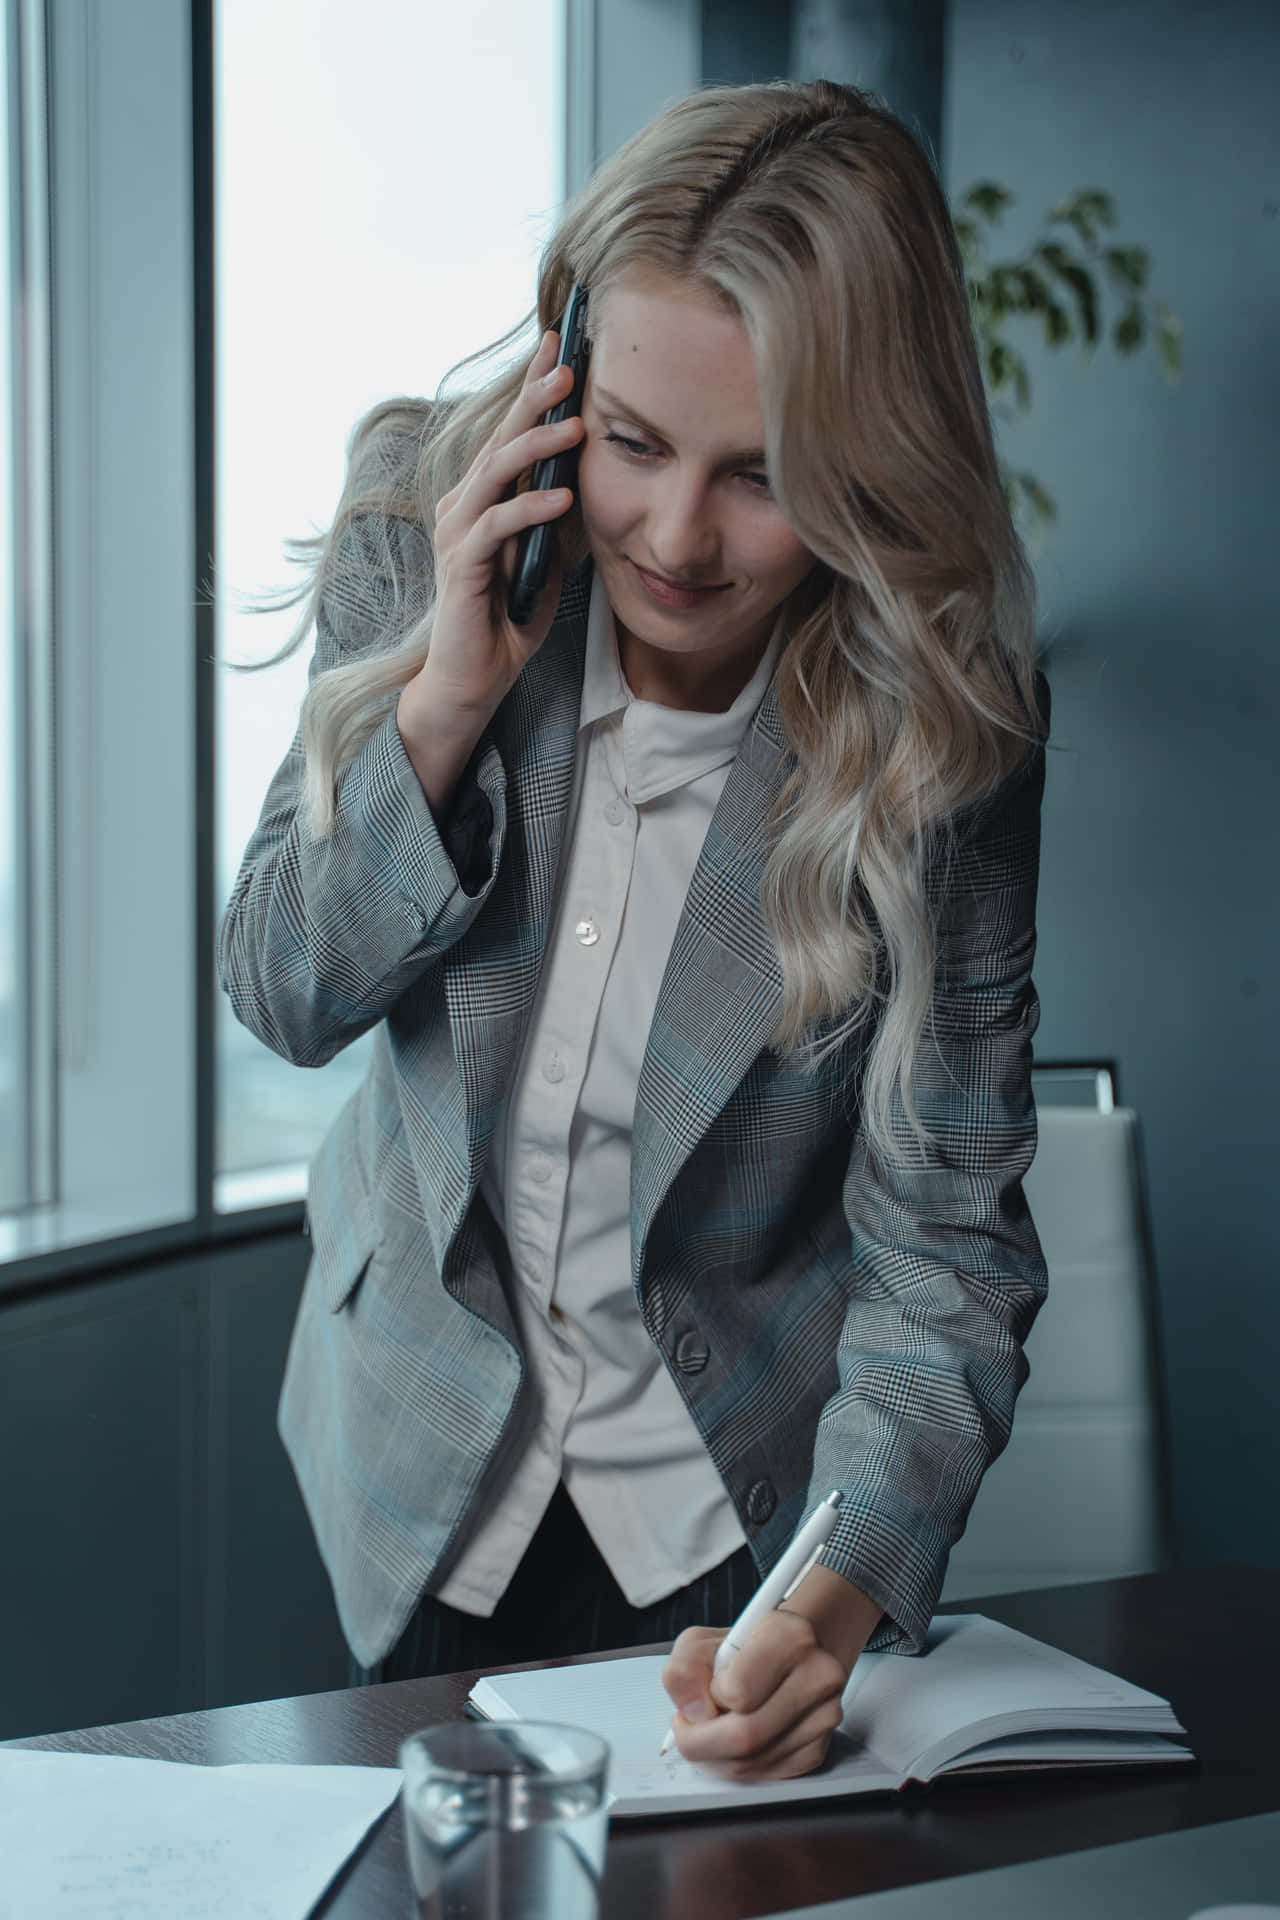 A Woman Is Talking On The Phone While Sitting At A Desk